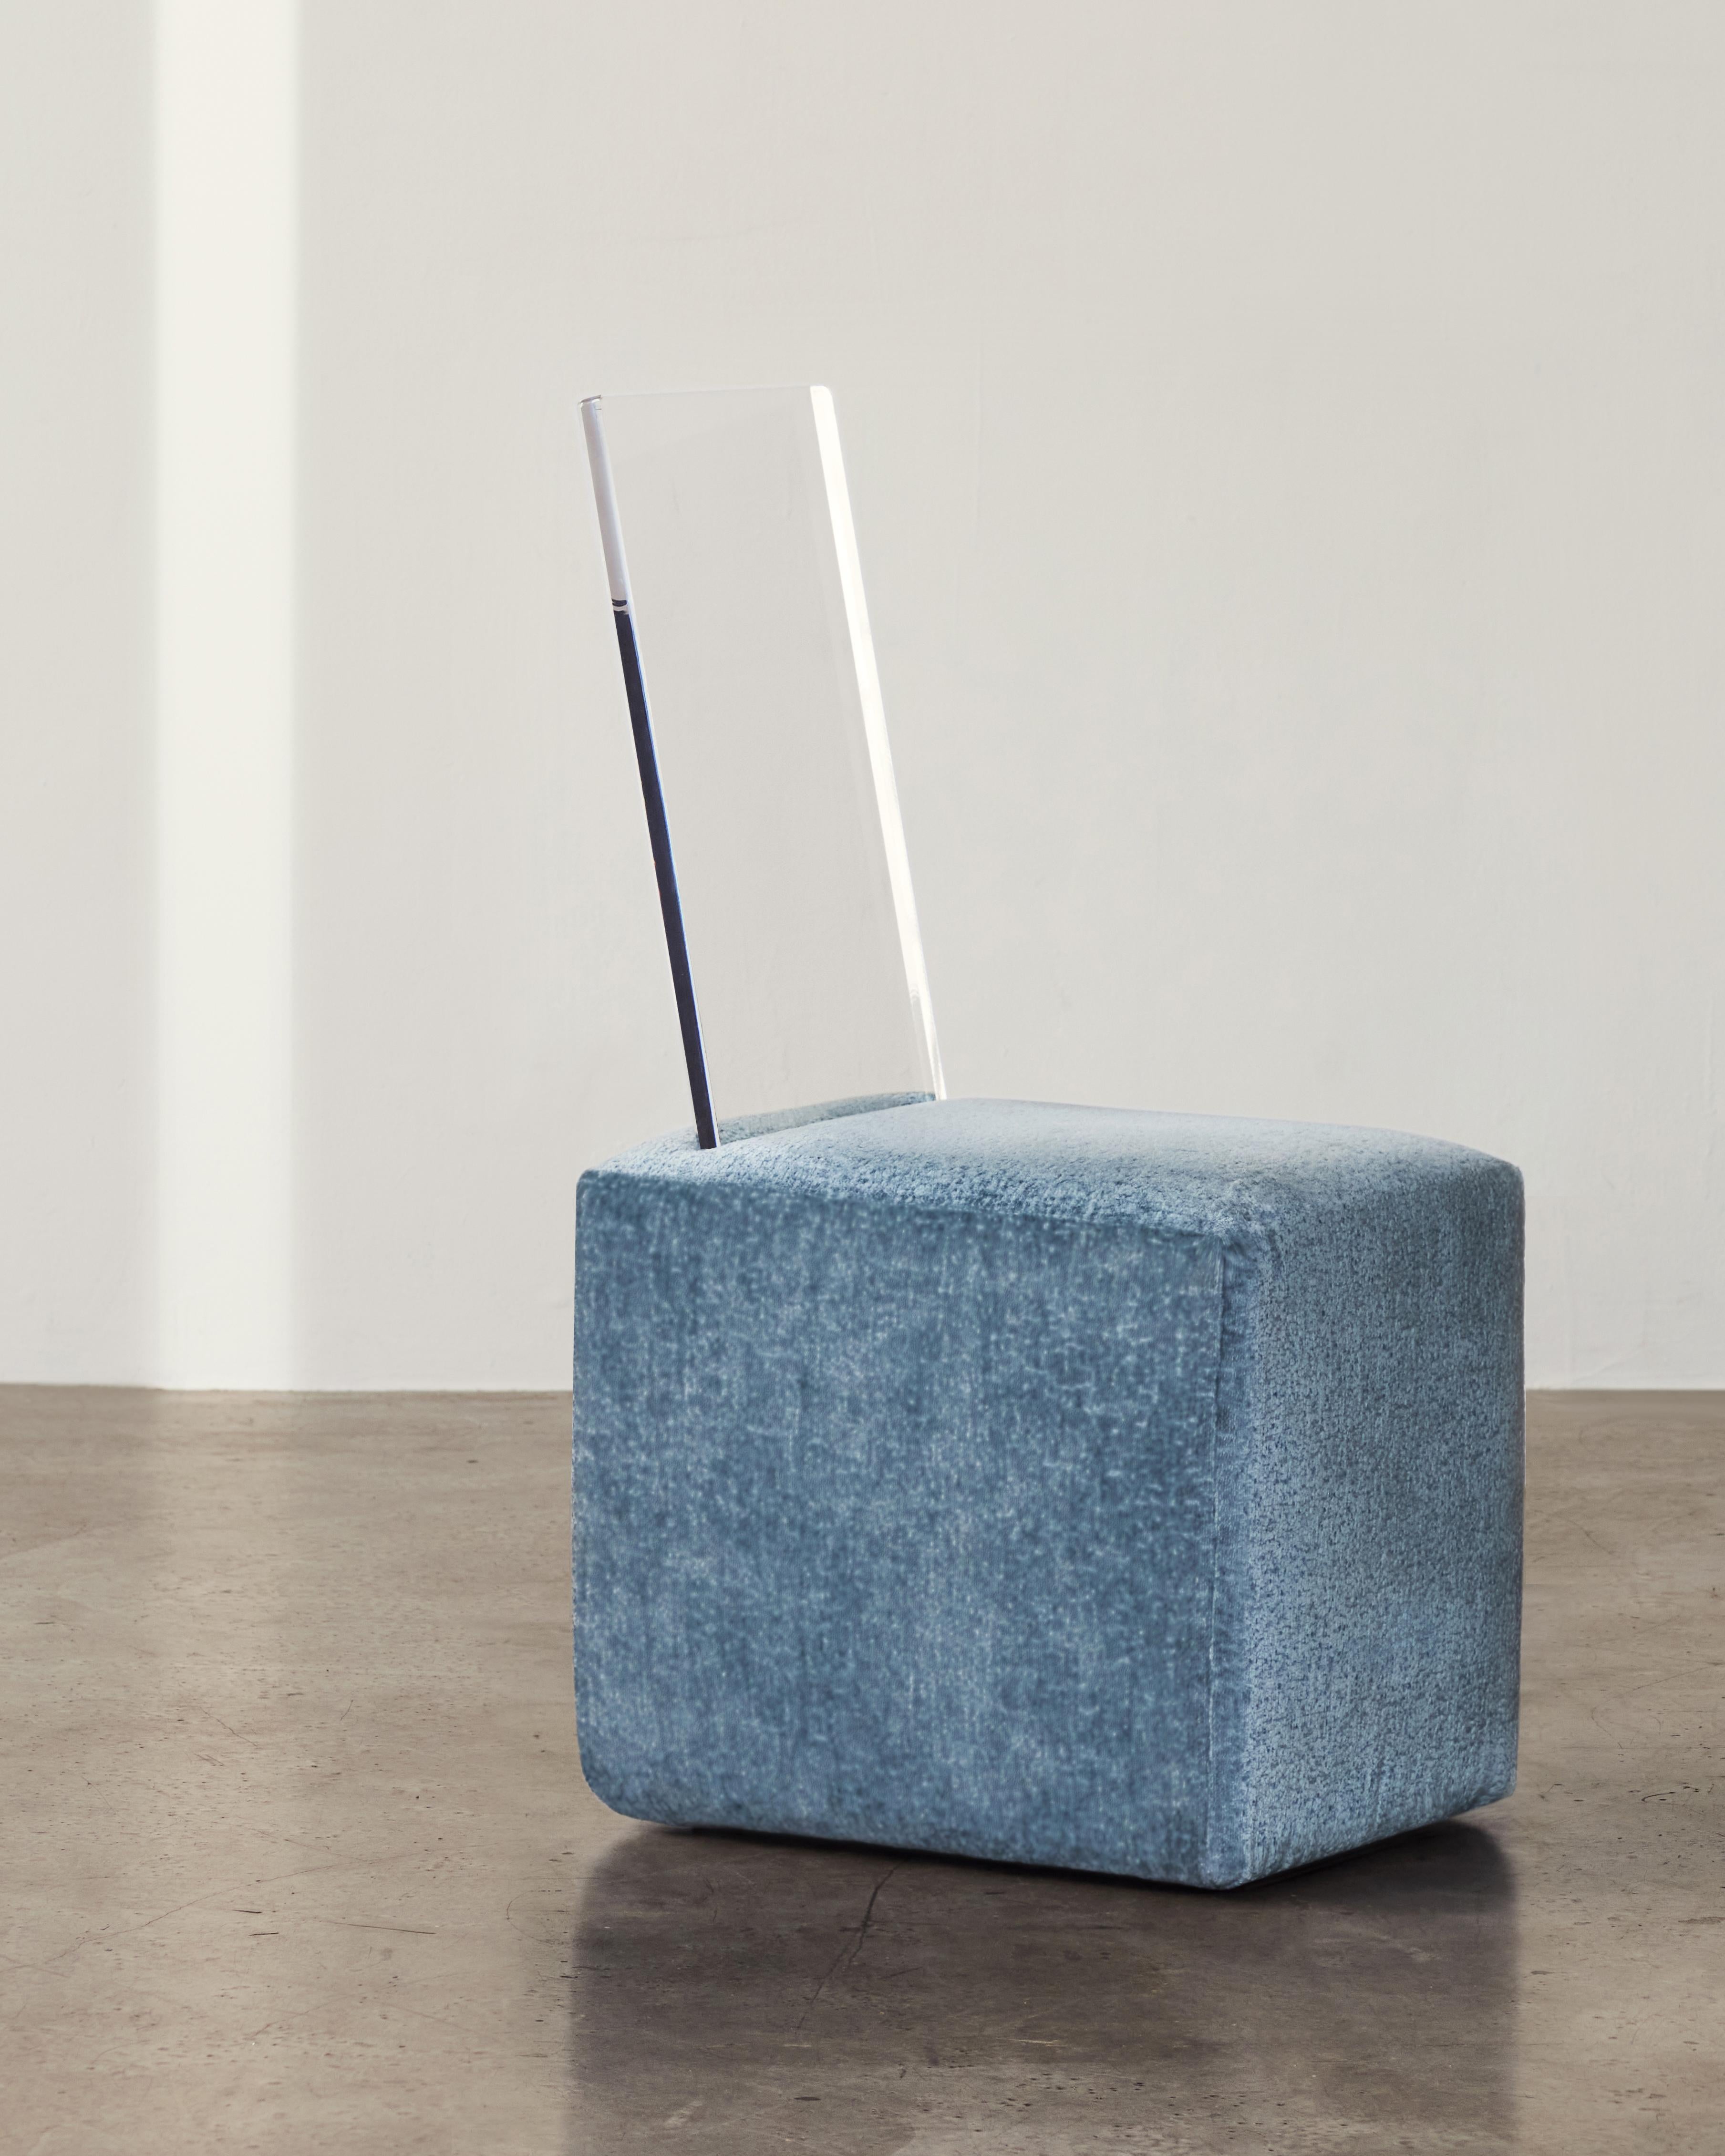 As seen in: Sight Unseen, Interior Design Magazine, Surface Magazine

BLOC Cube Chair is part of a five-piece collection of sculptural upholstered and mixed-material furniture. BLOC Collection draws inspiration from familiar geometric shapes often